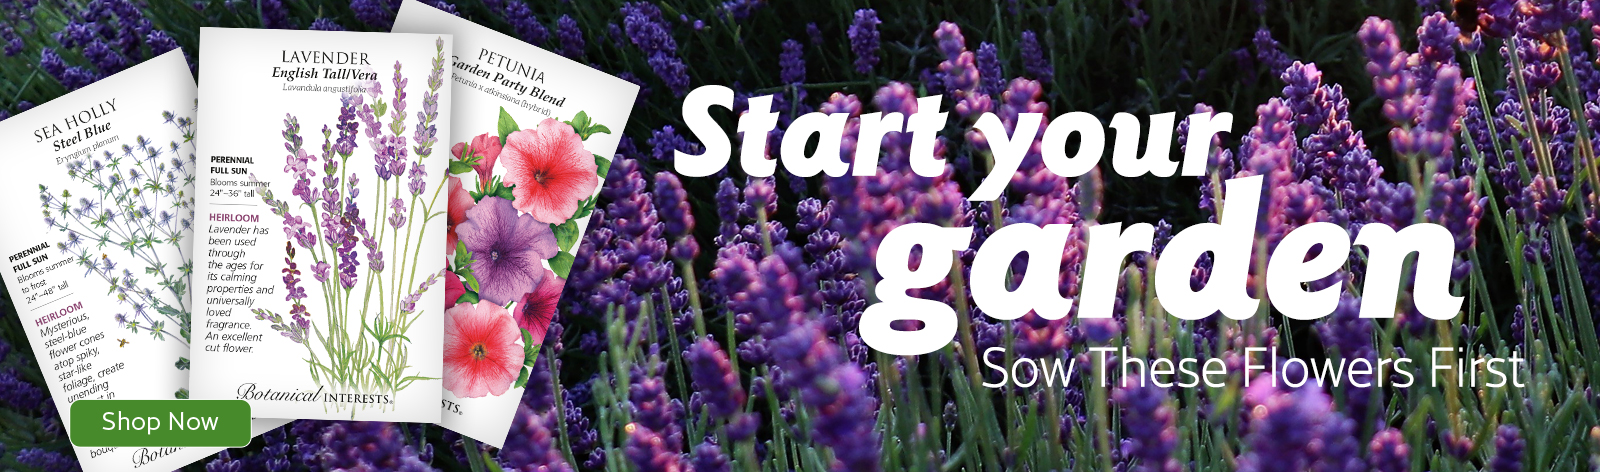 Start Your Garden! Plant These Flowers First!